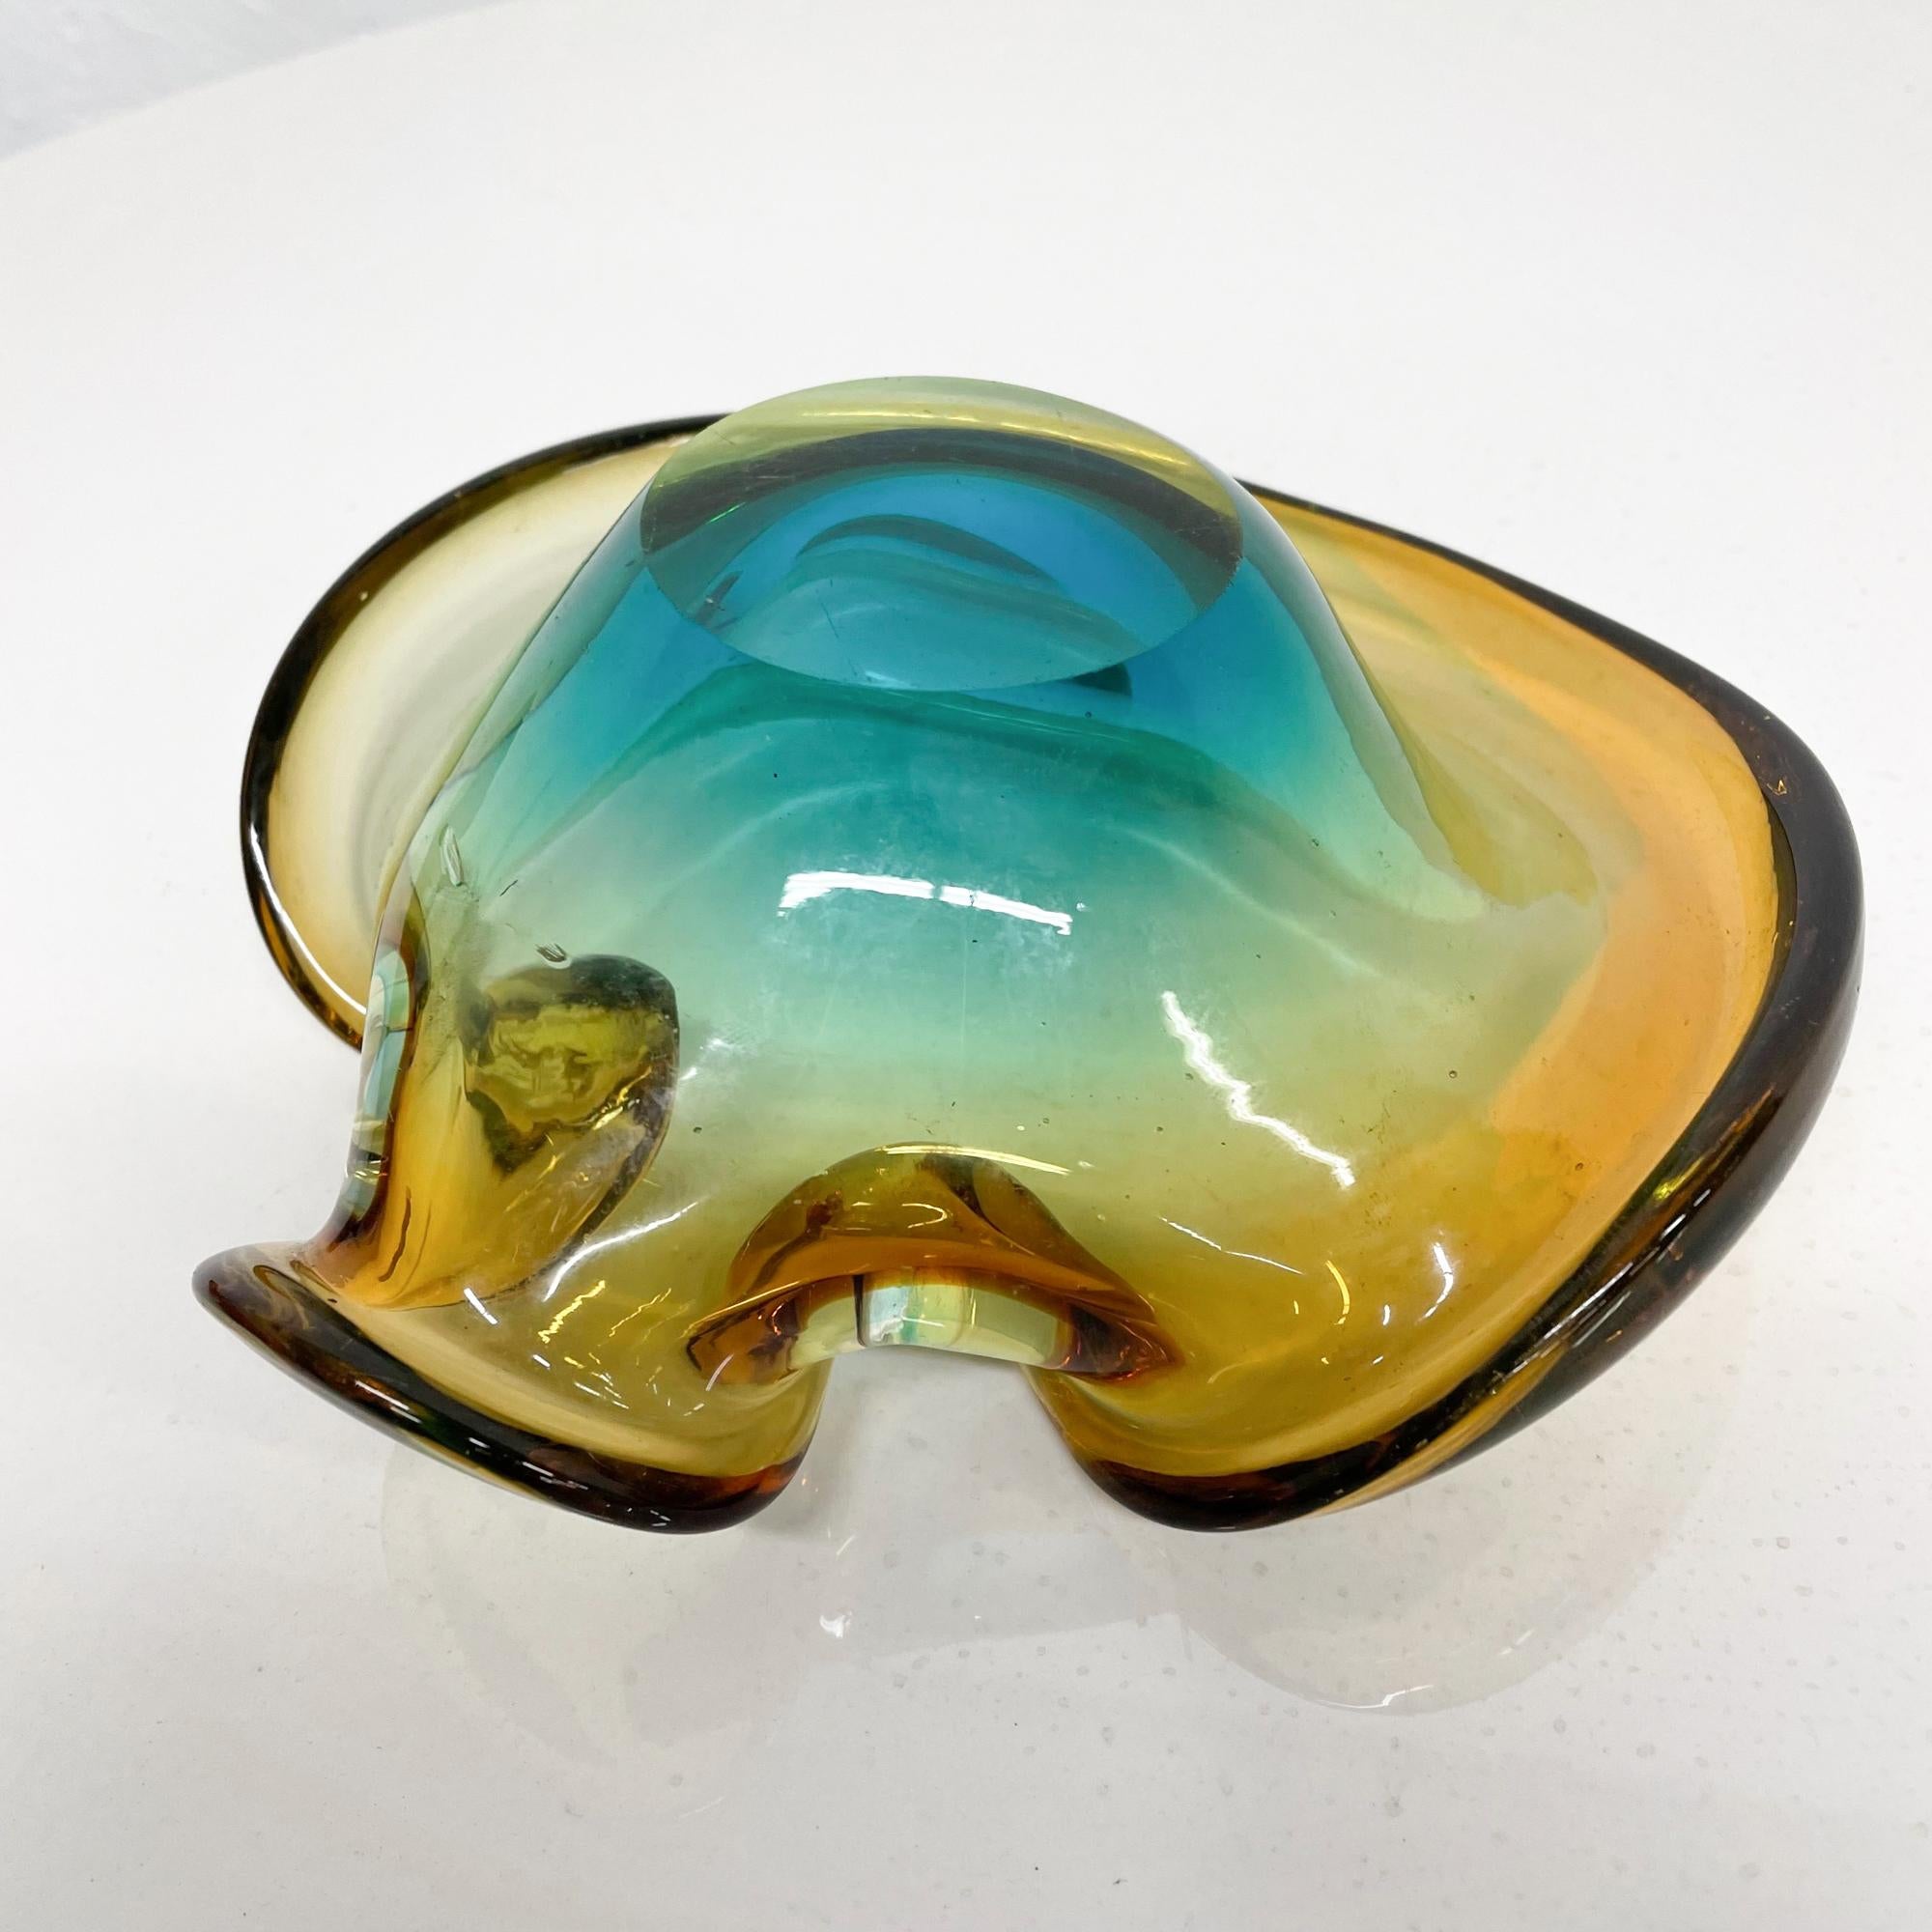 Swirling Color Curled Murano Sommerso Art Glass Ashtray Bowl Seguso Italy 1970s 3